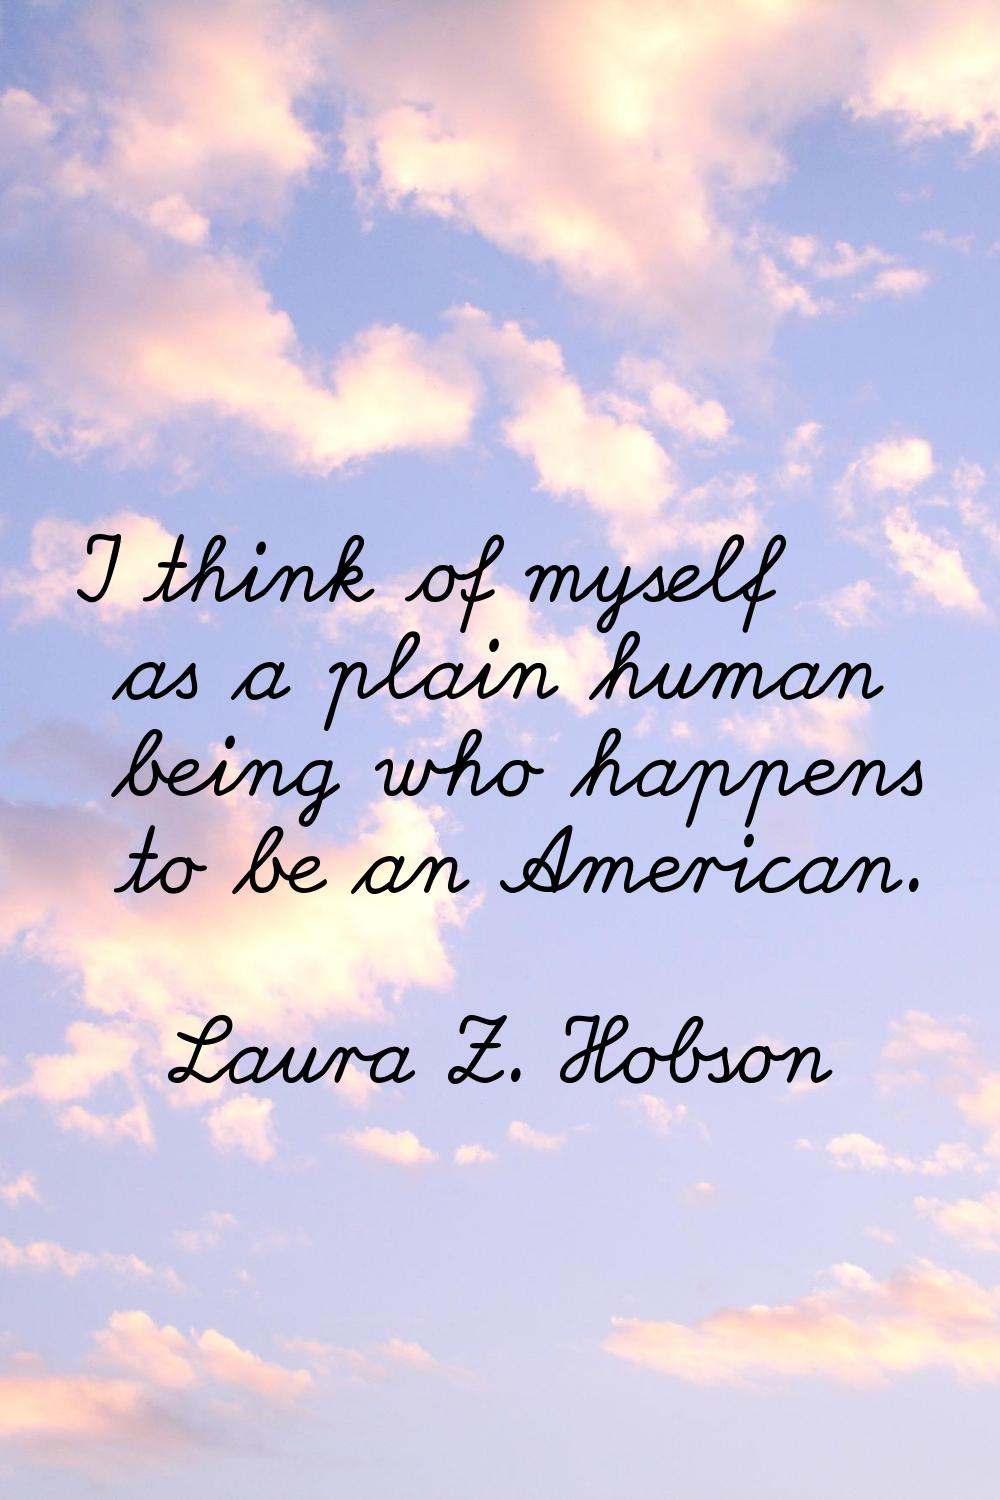 I think of myself as a plain human being who happens to be an American.